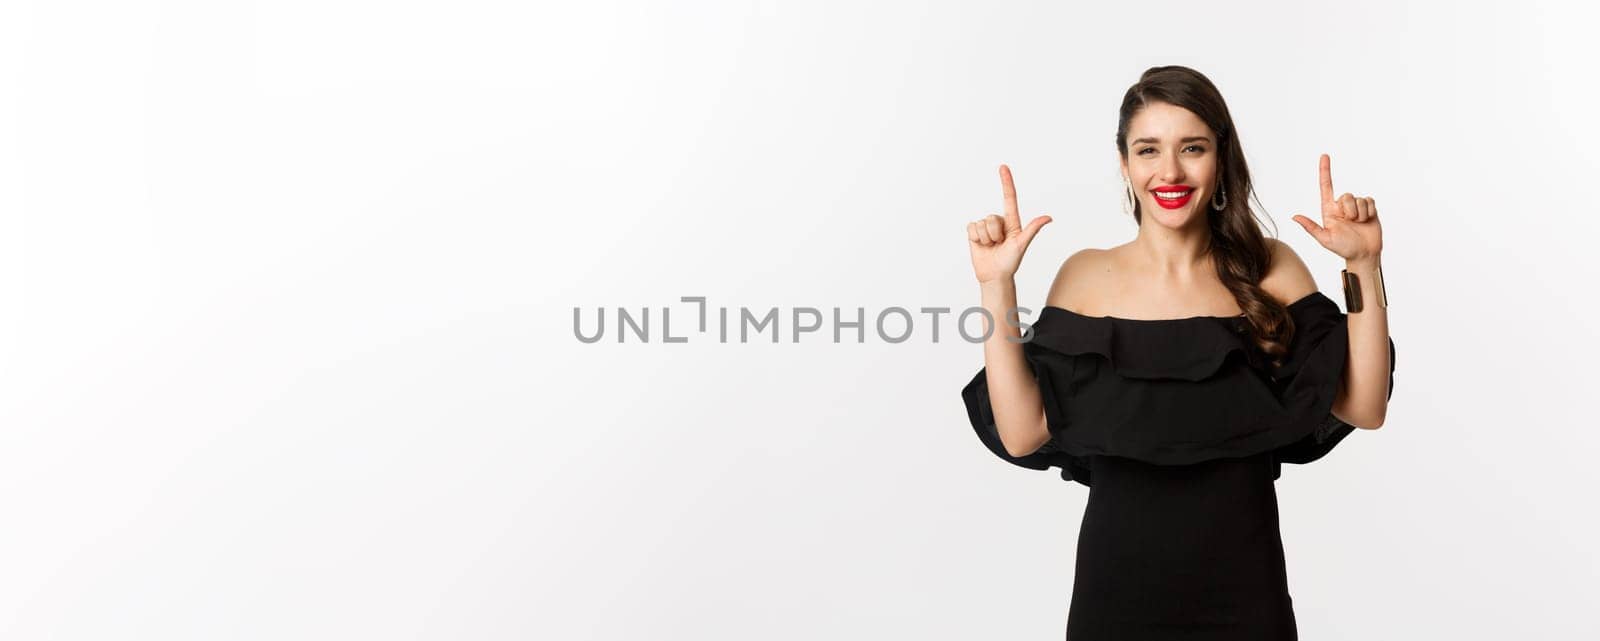 Fashion and beauty. Charming woman with red lips, black dress, smiling happy and pointing fingers up, showing logo, white background.